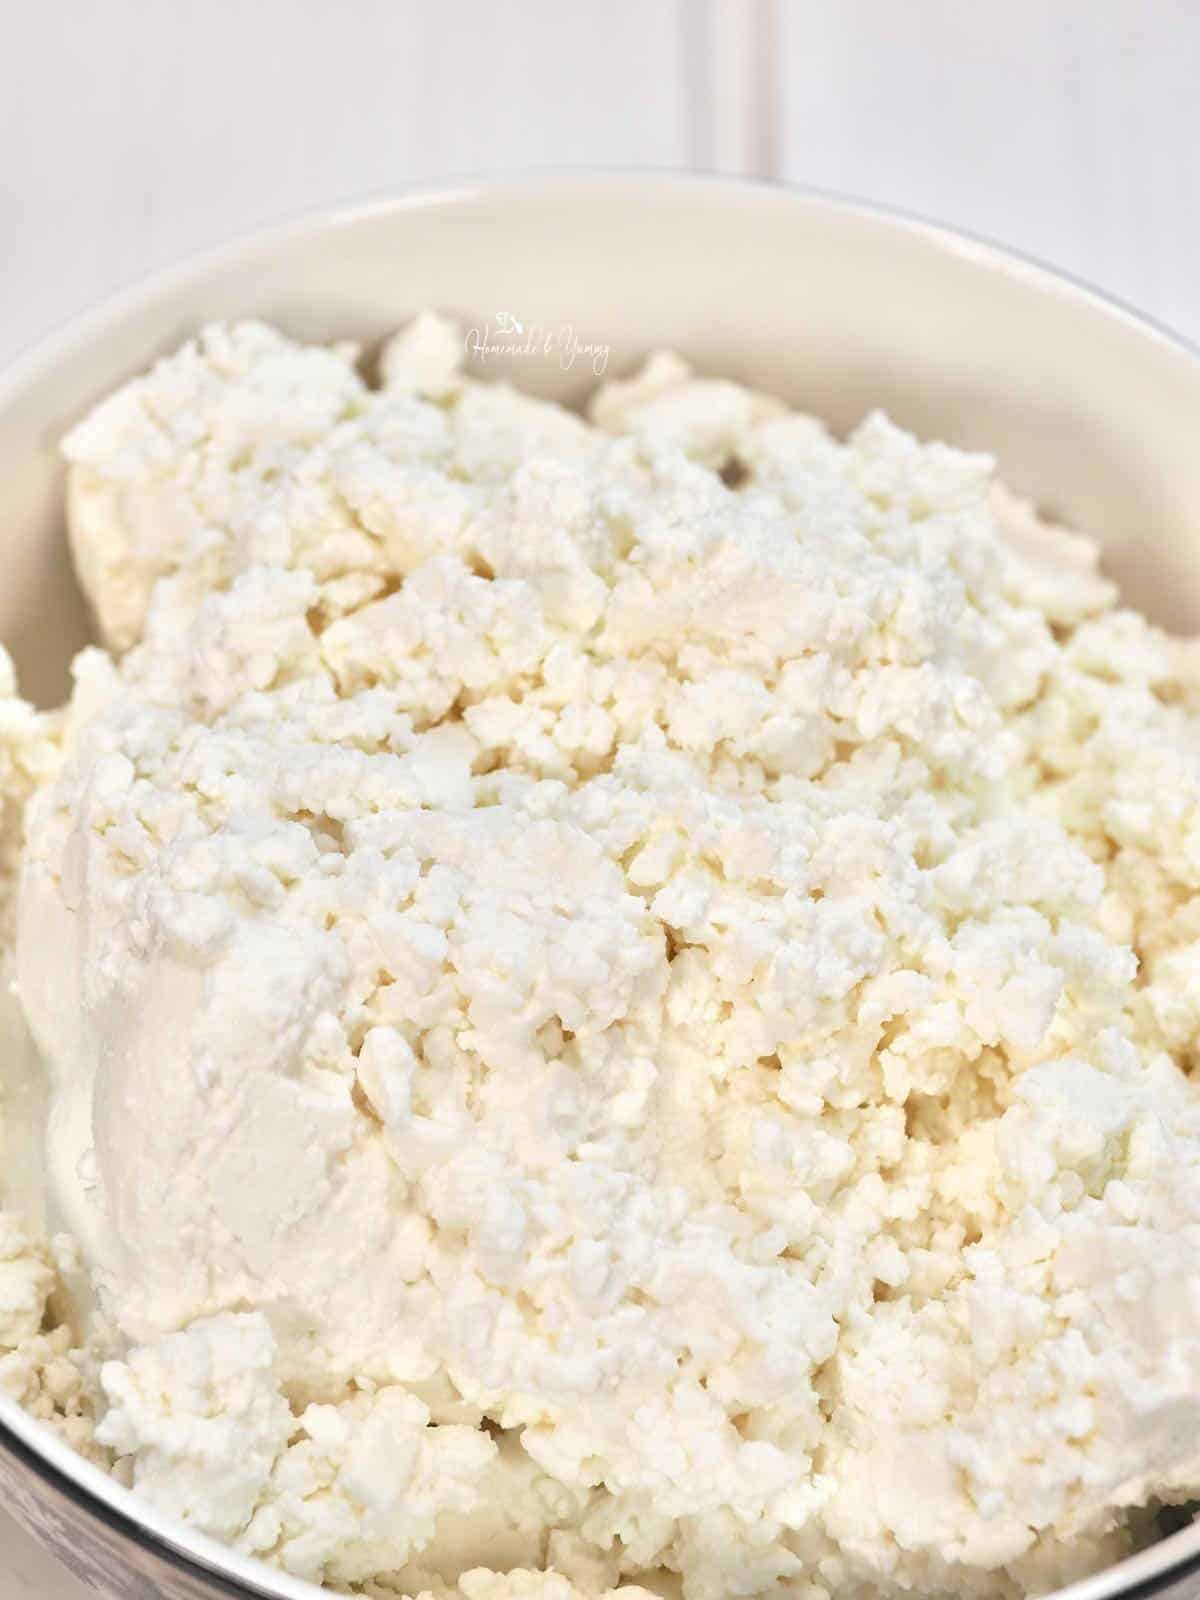 Dry cottage cheese in a bowl.